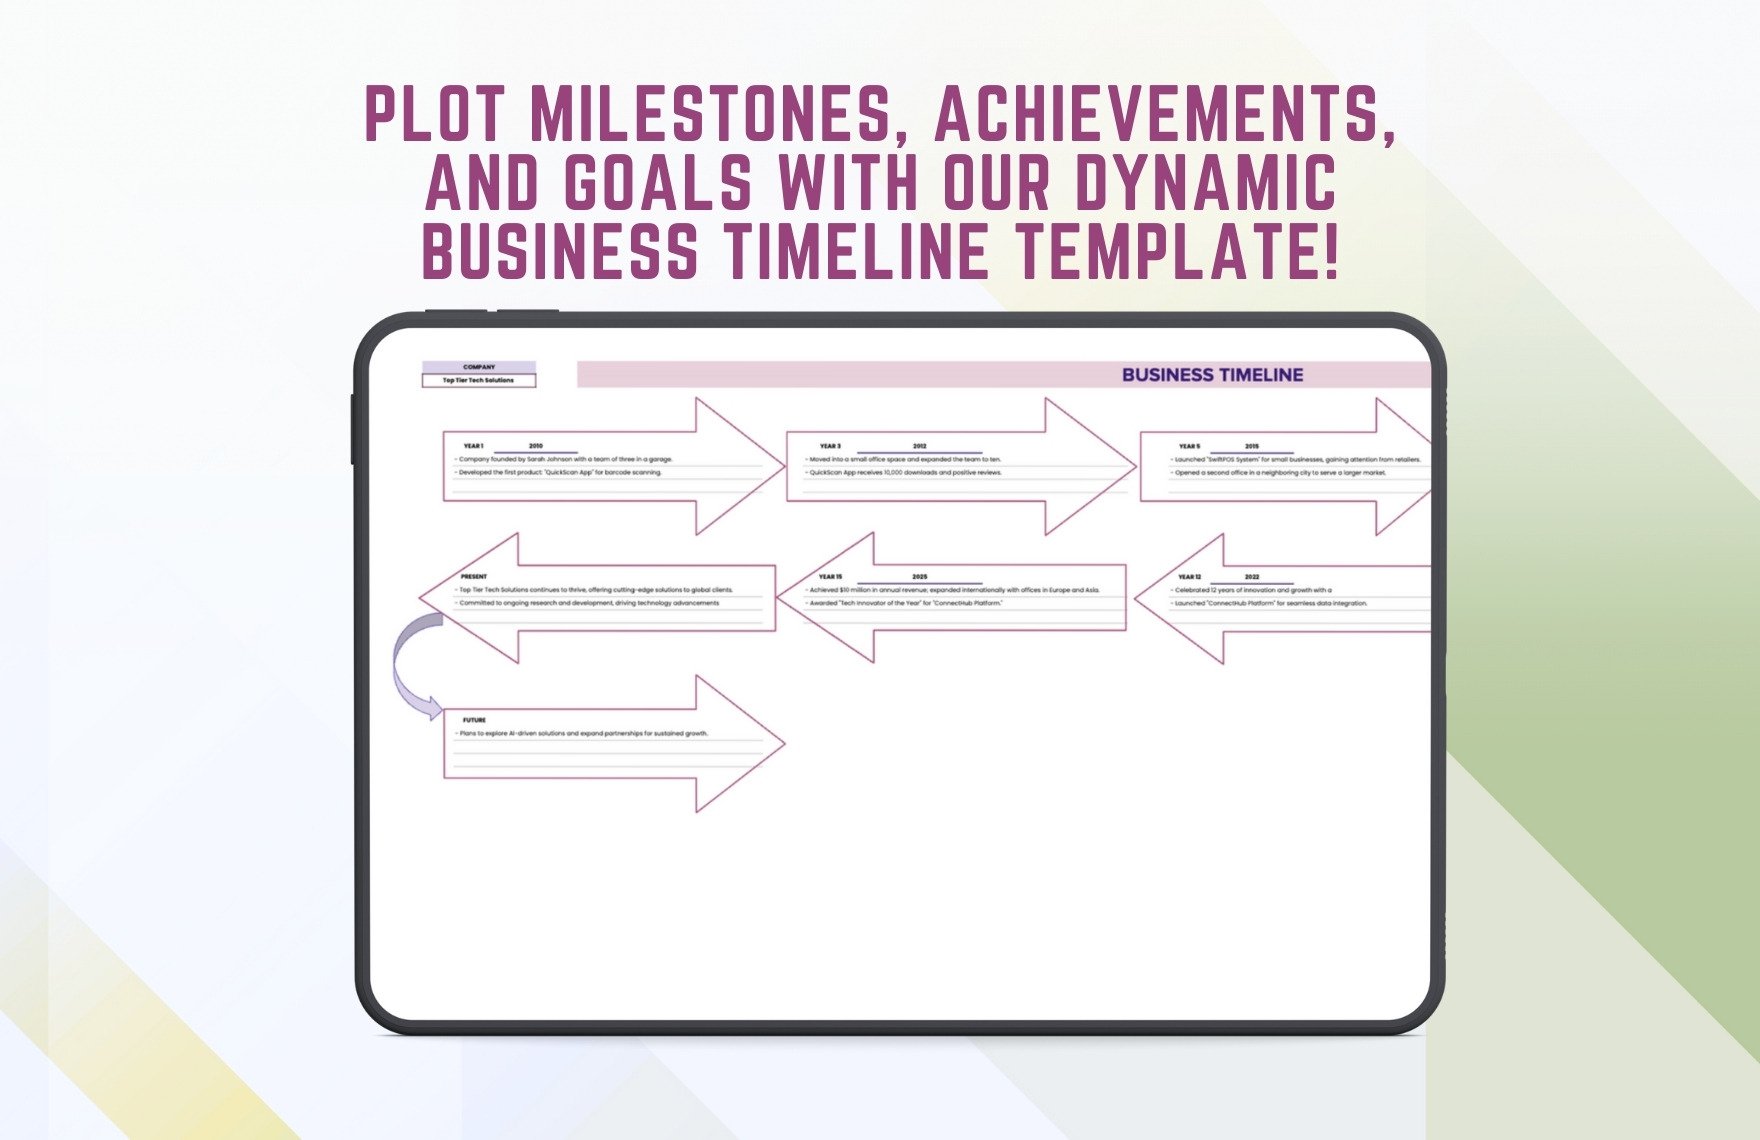 Business Timeline Template